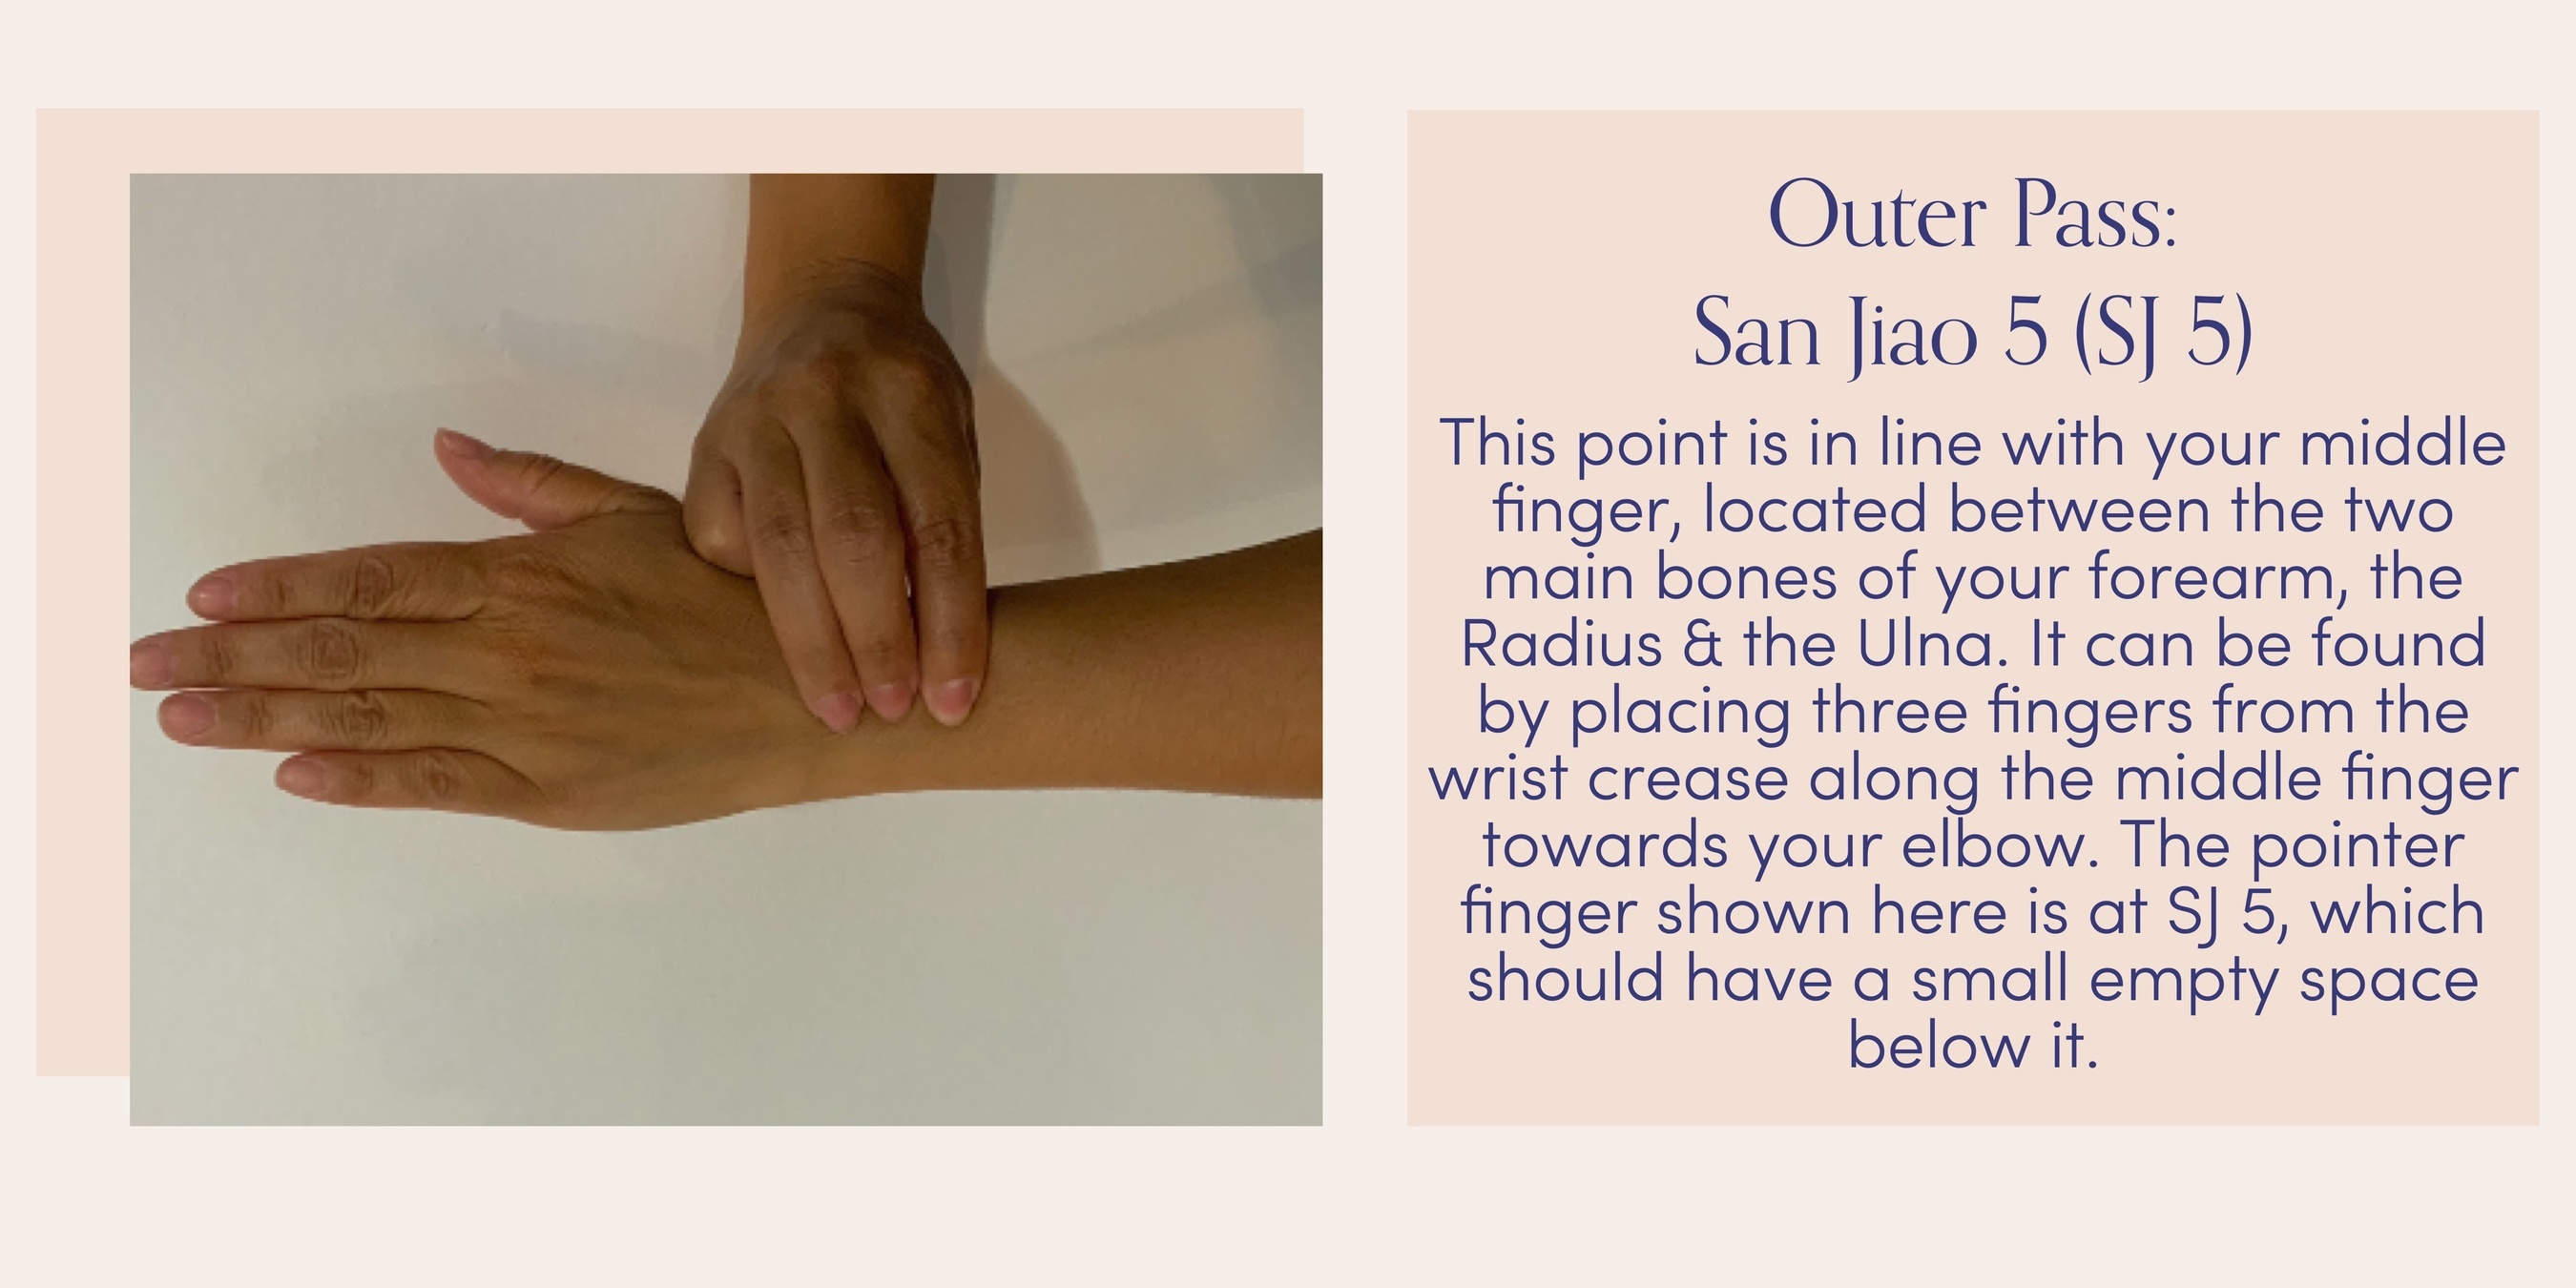 Acupressure point, San Jiao 5, which can be found on the wrists: This point is in line with your middle finger, located between the two main bones of your forearm, the Radius & the Ulna. It can be found by placing three fingers from the wrist crease along the middle finger towards your elbow. The pointer finger shown here is at SJ 5, which should have a small empty space below it. 